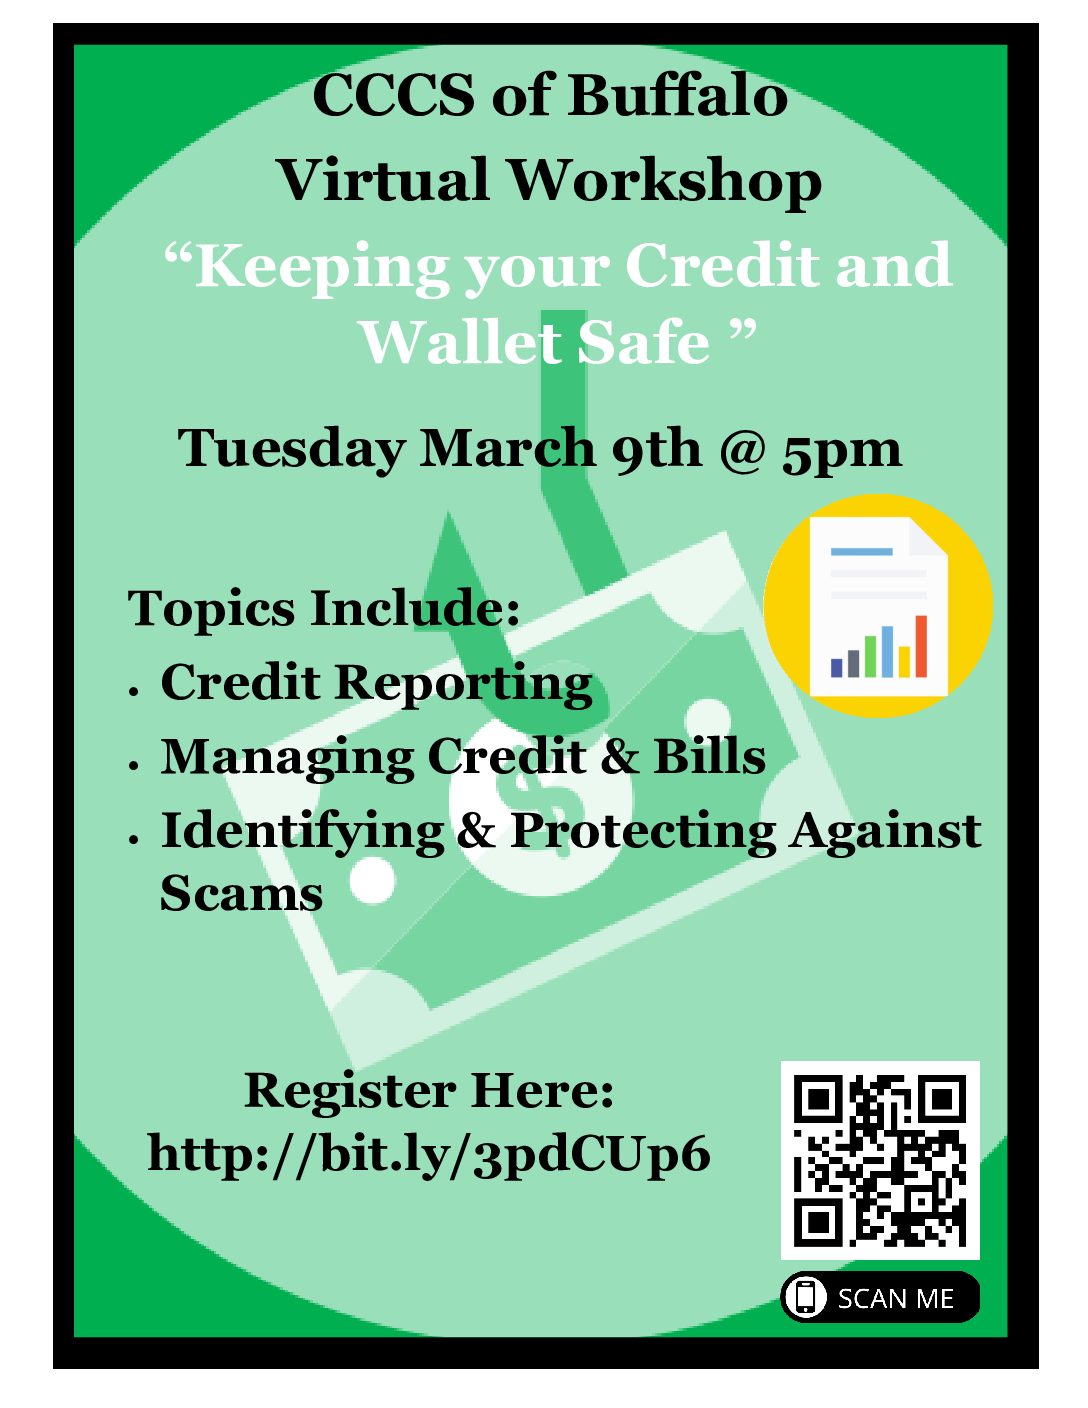 CCCS Announces Free Virtual Workshop on Keeping your Credit and Wallet Safe